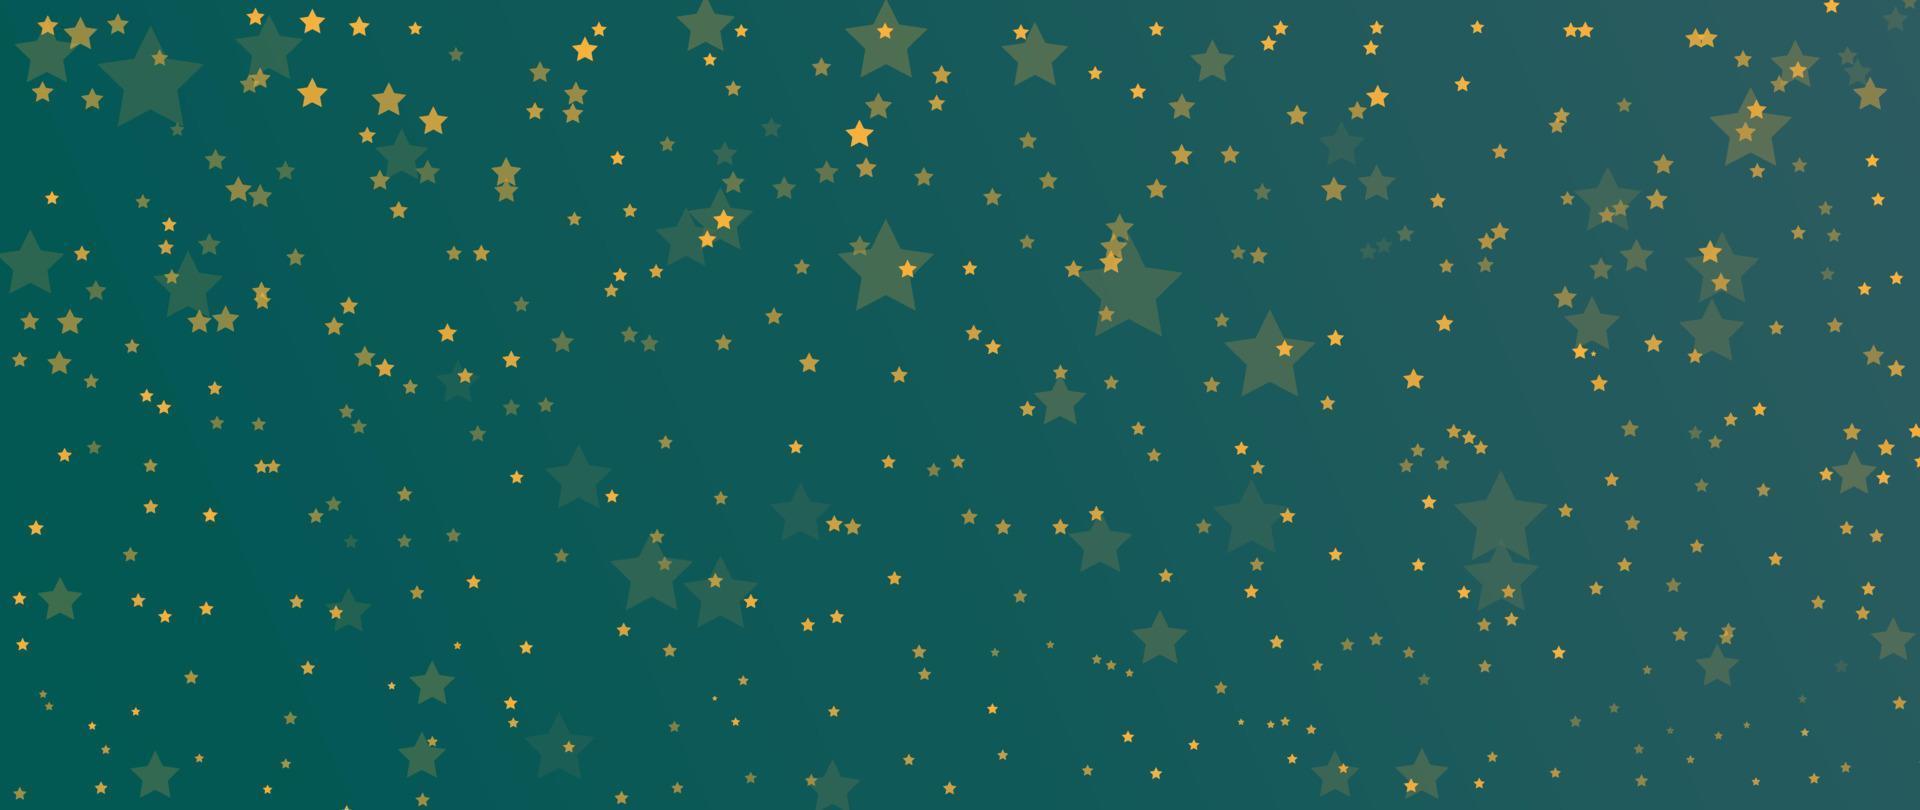 Elegant winter star background vector illustration. Luxury decorative bright gold star with bokeh light green background. Design suitable for invitation card, greeting, wallpaper, poster, banner.